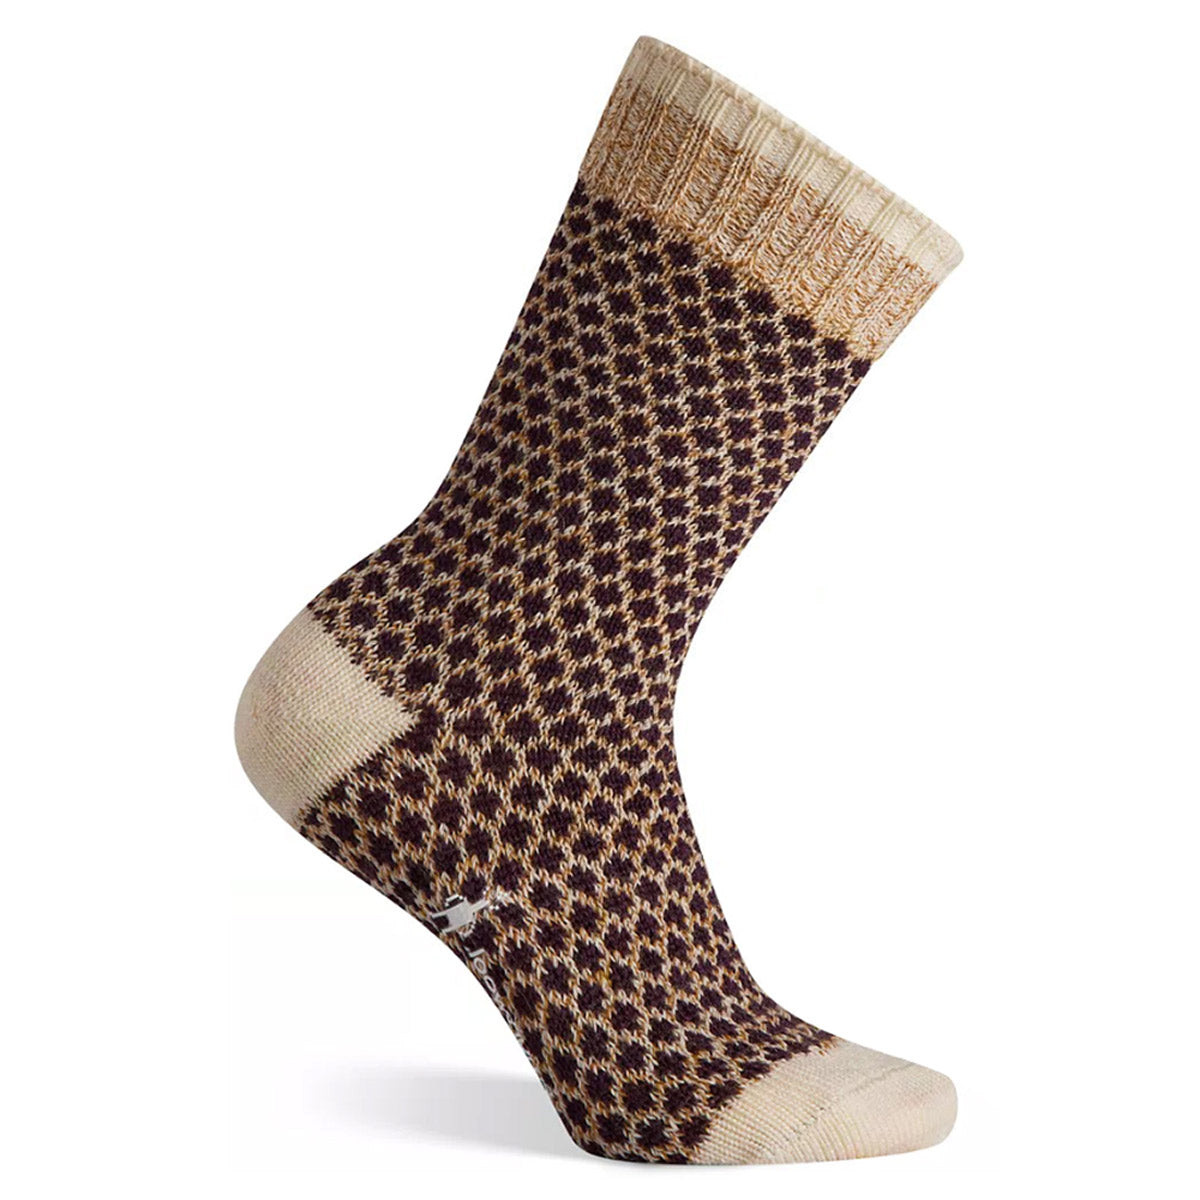 Sentence with replacements: Patterned Smartwool Popcorn Polka Dot Acorn crew sock displayed against a white background.